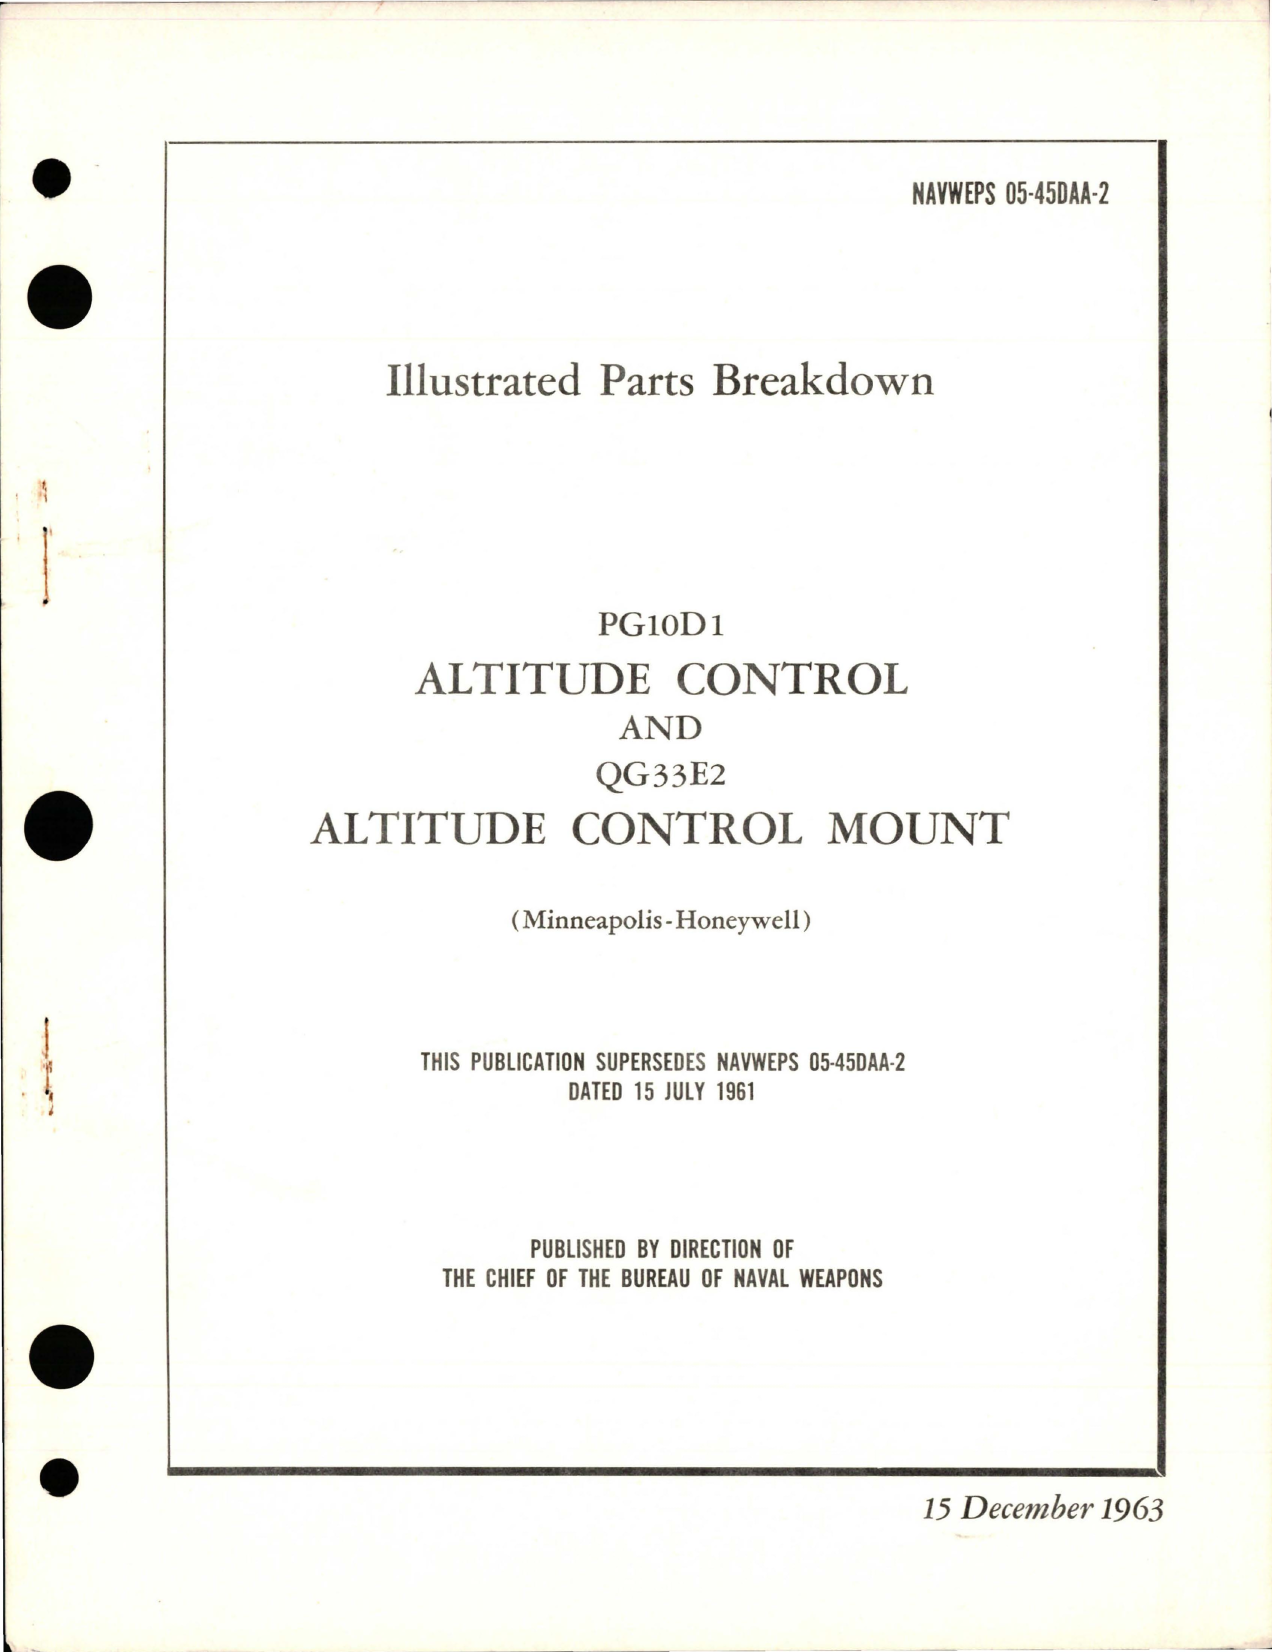 Sample page 1 from AirCorps Library document: Illustrated Parts Breakdown for Altitude Control - PG10D1 and Altitude Control Mount - QG33E2